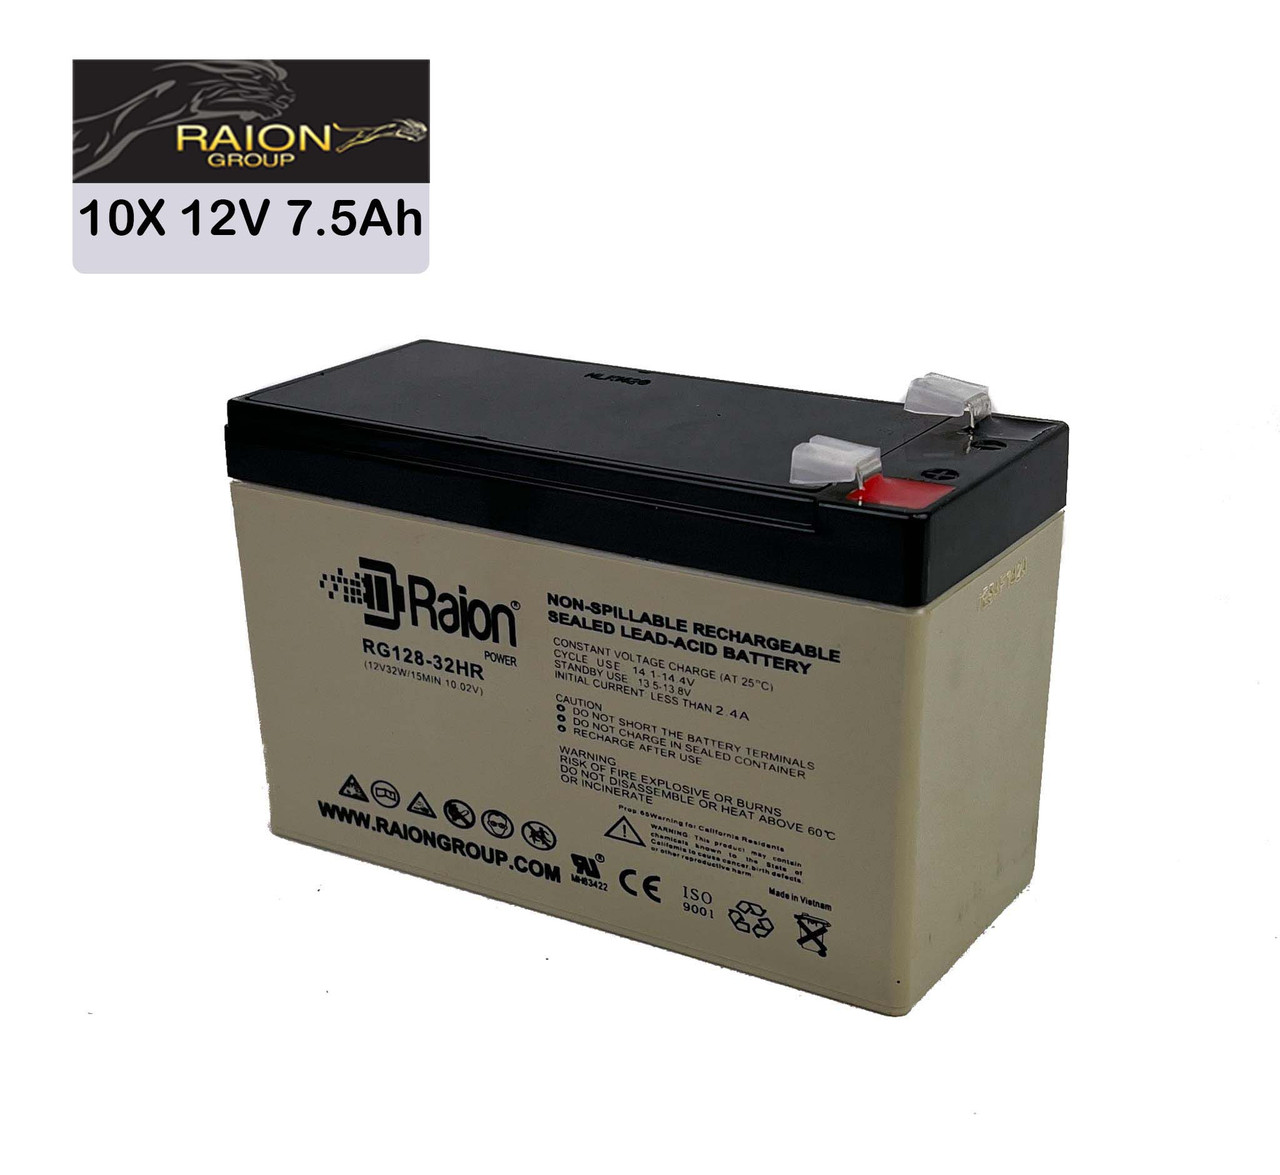 Raion Power 12V 7.5Ah High Rate Discharge UPS Batteries for Minuteman CP 2K/2 - 10 Pack